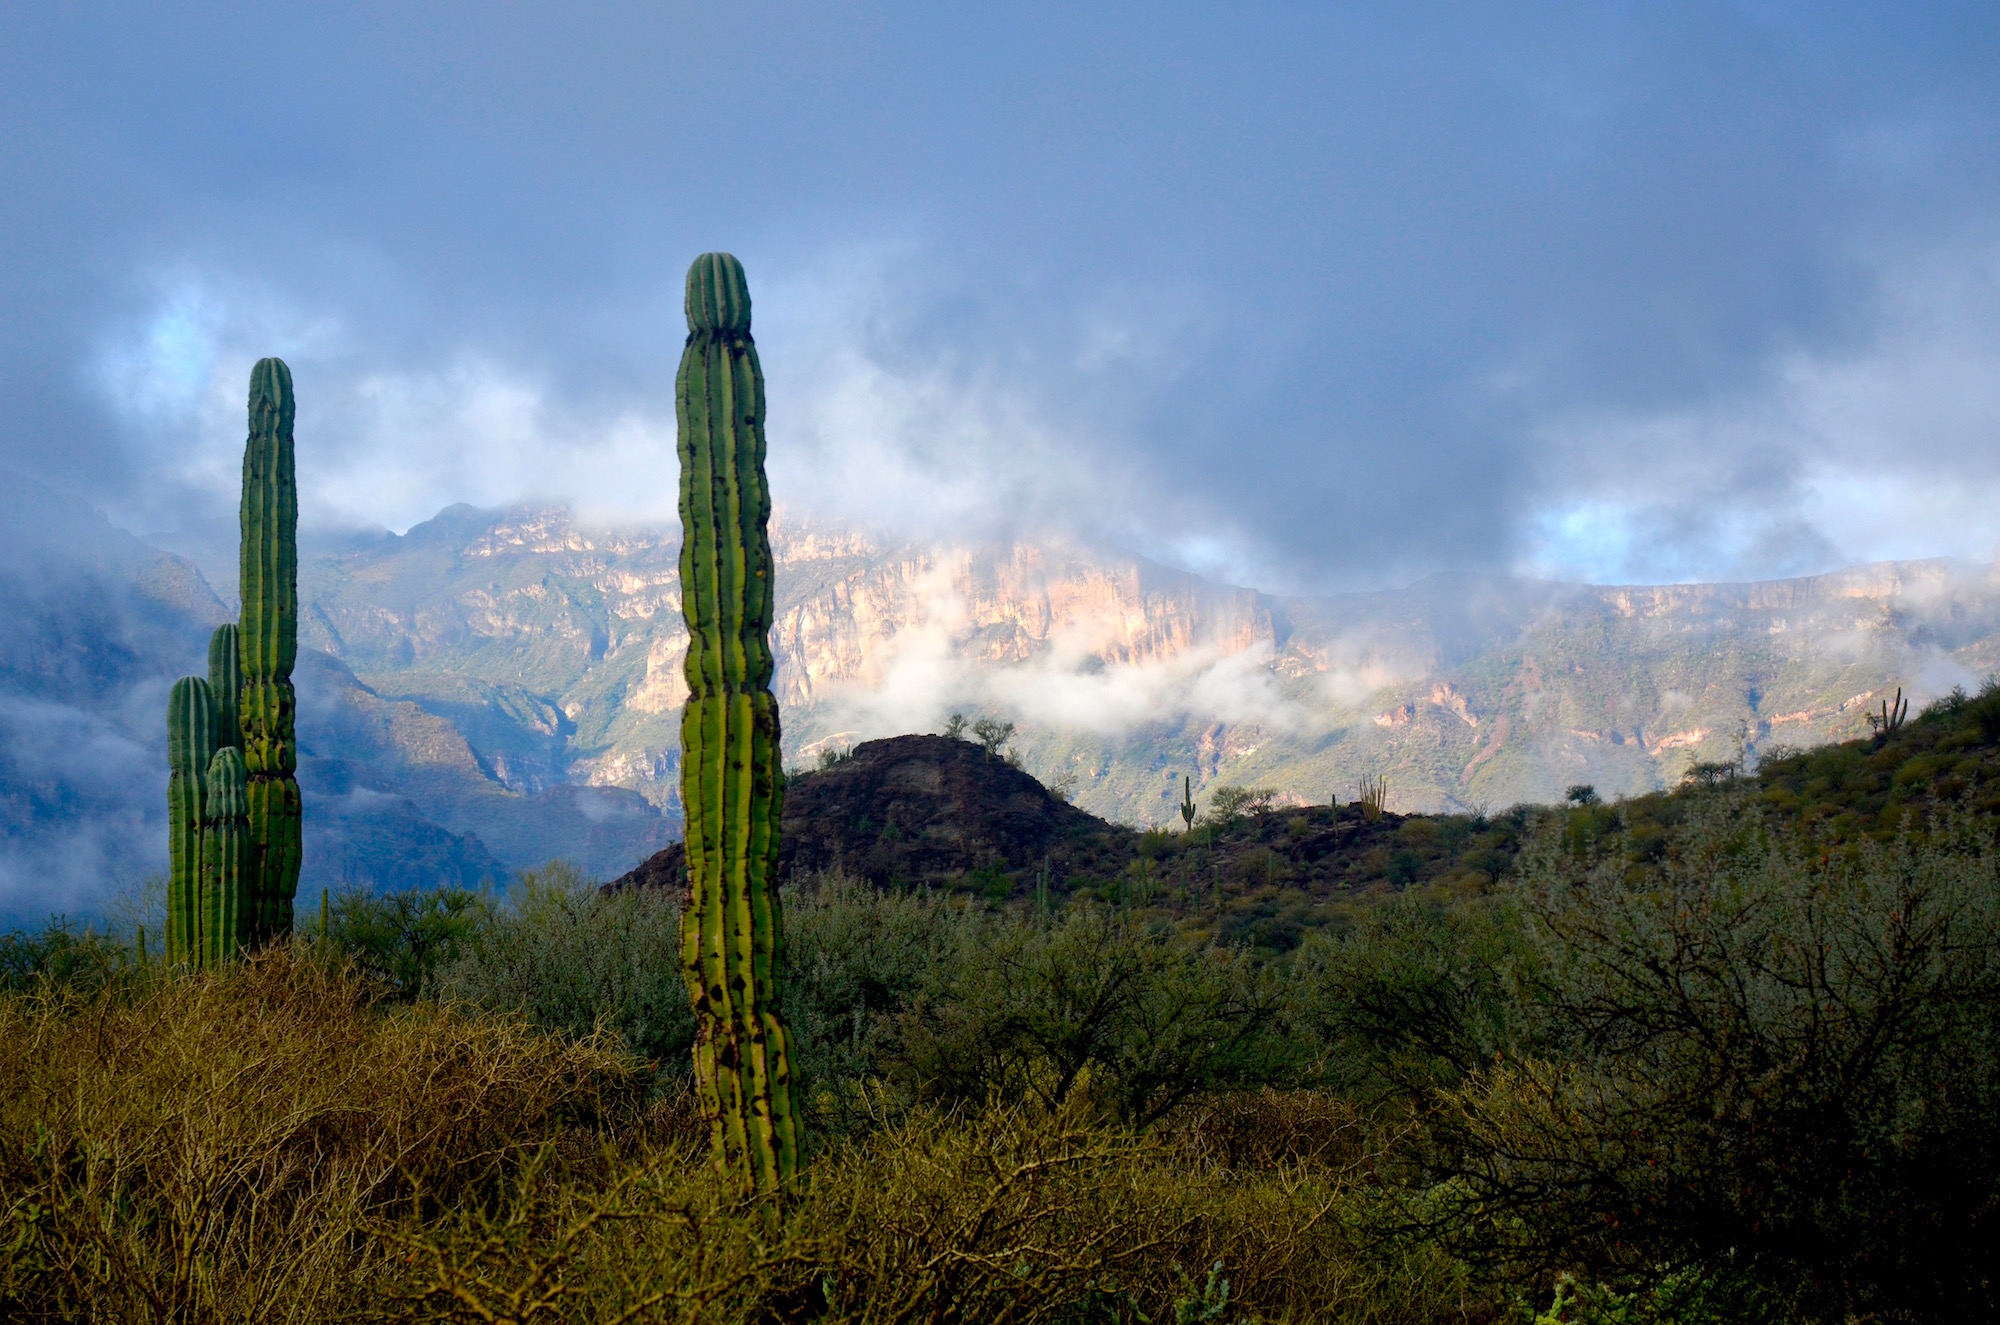 Cactus with clouds and mountains in the background